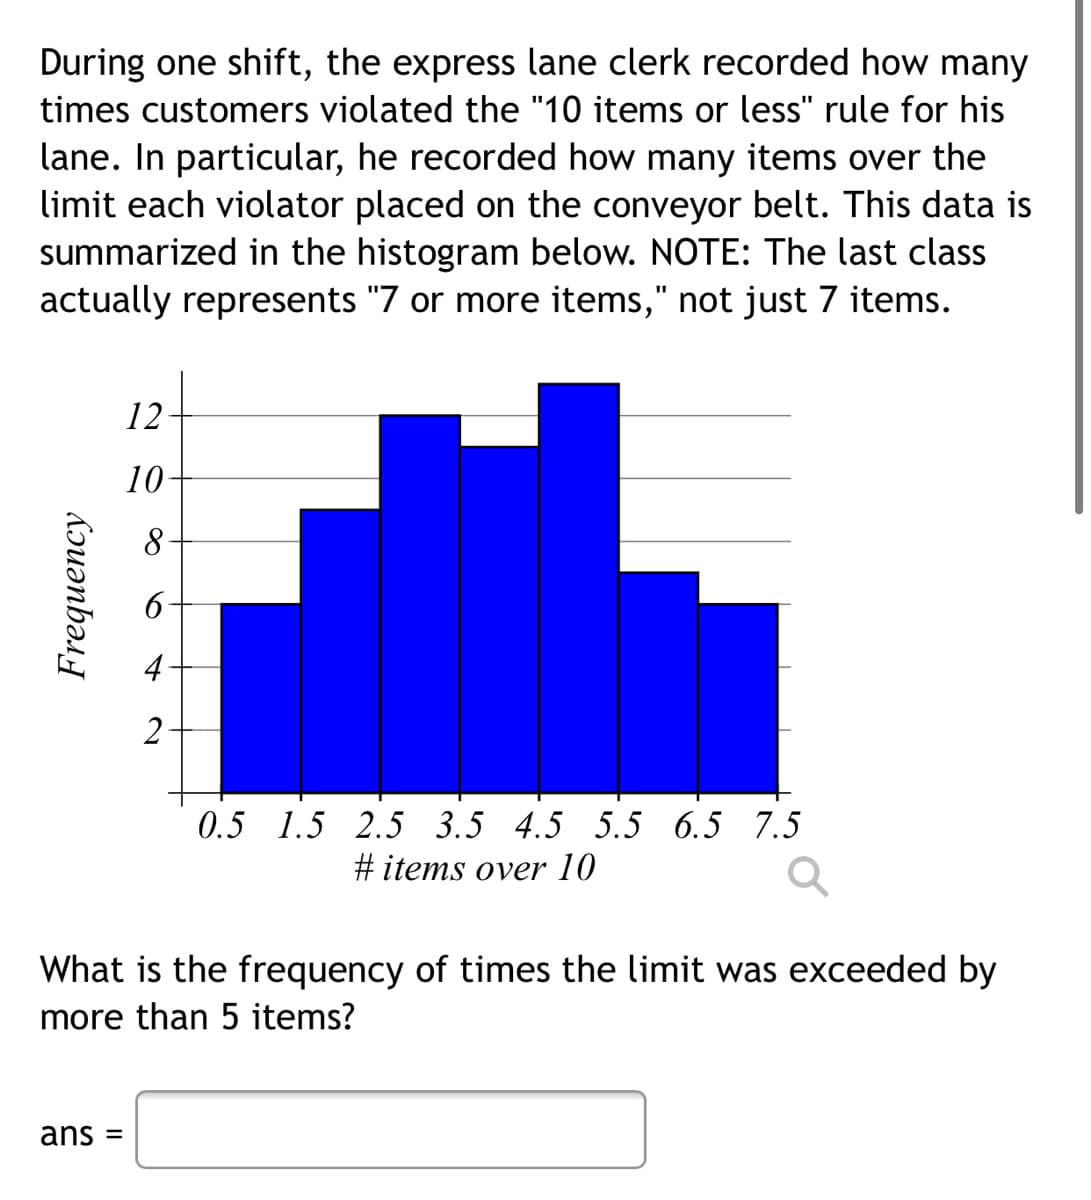 During one shift, the express lane clerk recorded how many
times customers violated the "10 items or less" rule for his
lane. In particular, he recorded how many items over the
limit each violator placed on the conveyor belt. This data is
summarized in the histogram below. NOTE: The last class
actually represents "7 or more items," not just 7 items.
12
10-
8
4
2
0.5 1.5 2.5 3.5 4.5 5.5 6.5 7.5
#items over 10
What is the frequency of times the limit was exceeded by
more than 5 items?
ans =
Frequency